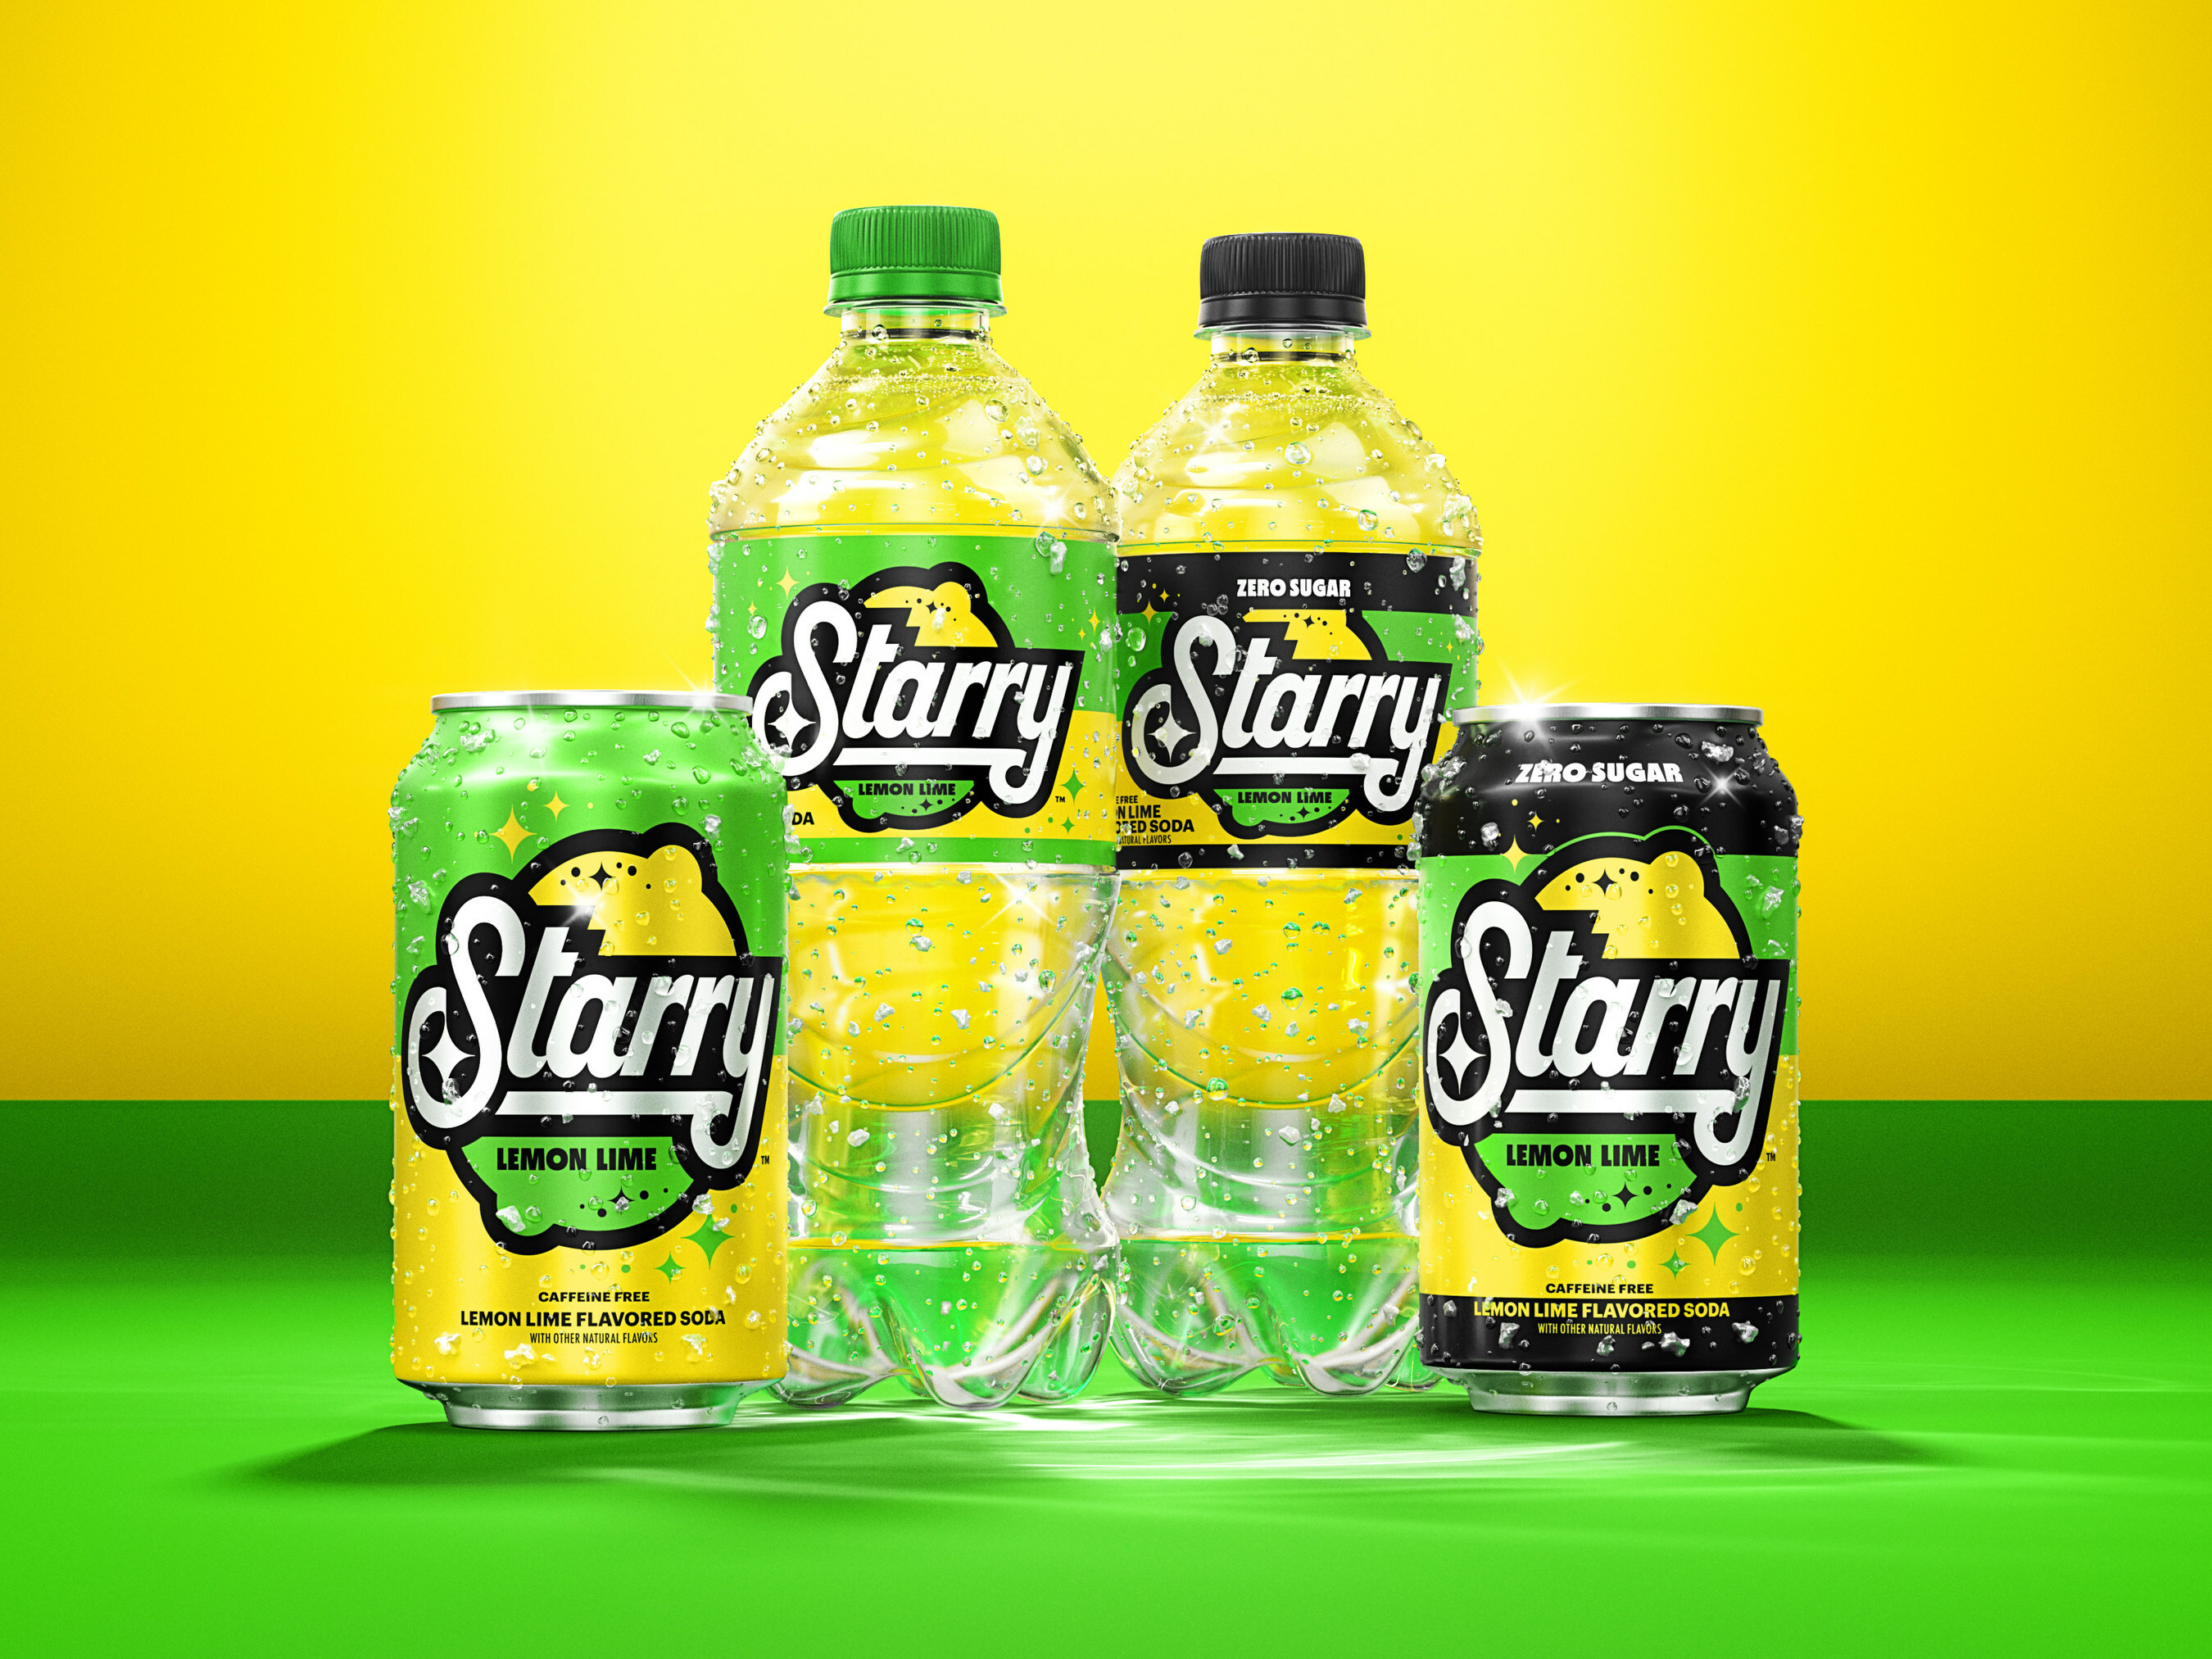 STARRY in Regular and Zero Sugar cans and bottles.